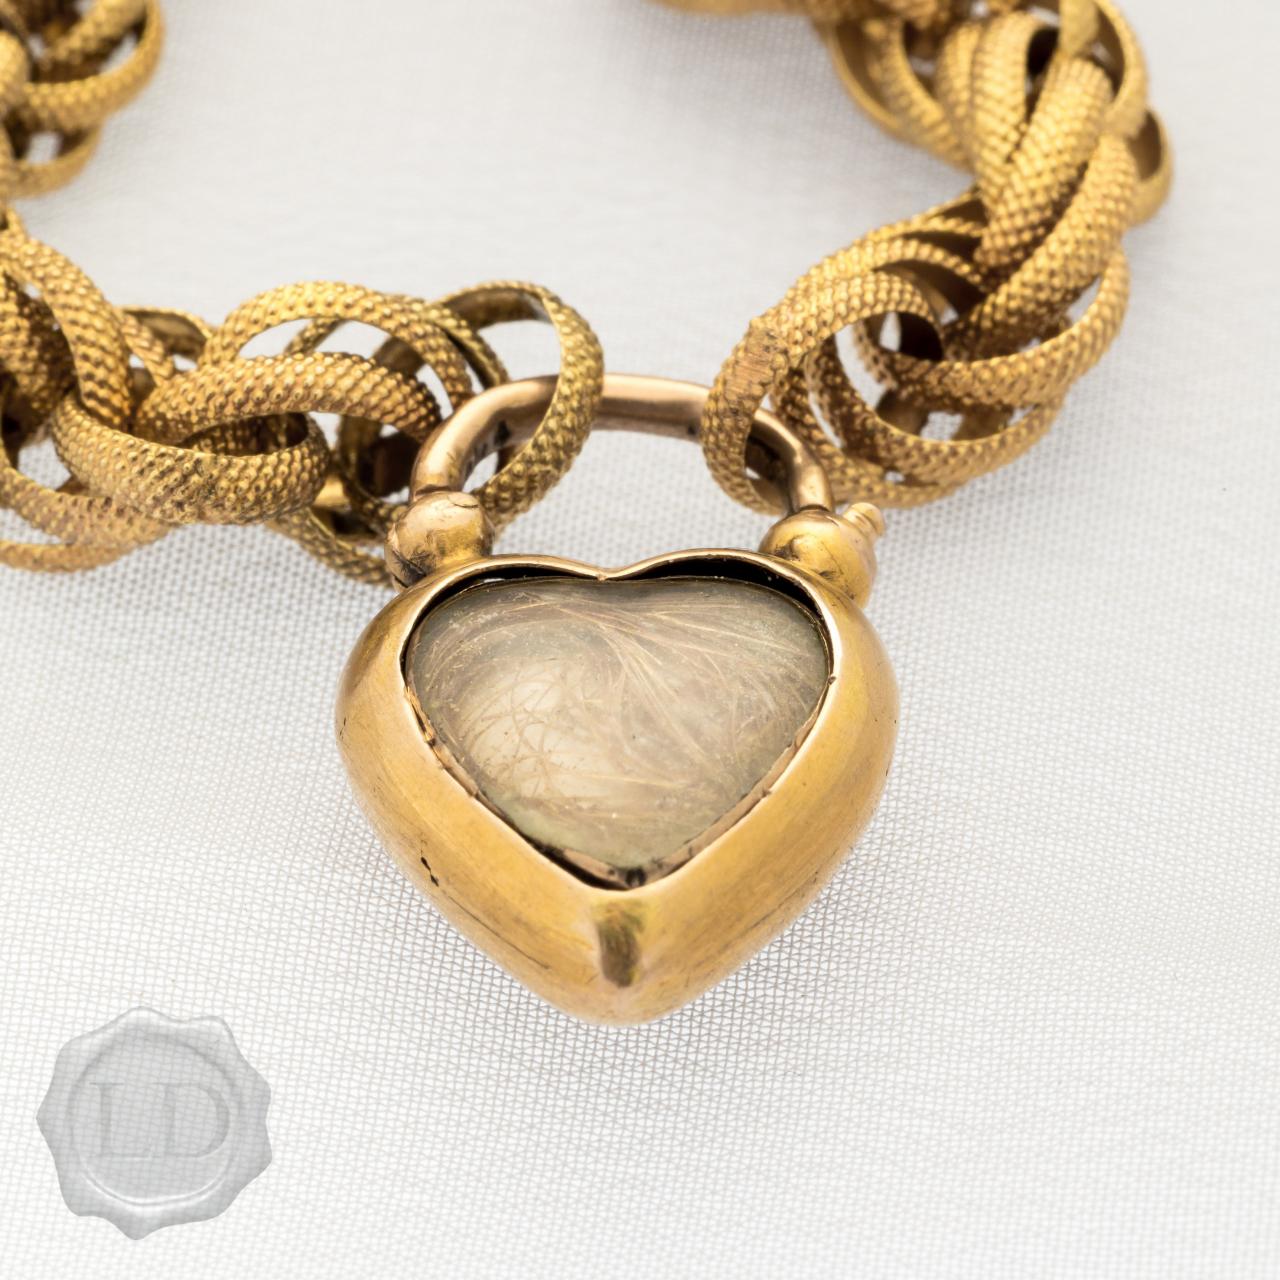 Worked gold fancy link bracelet with forget me not clasp